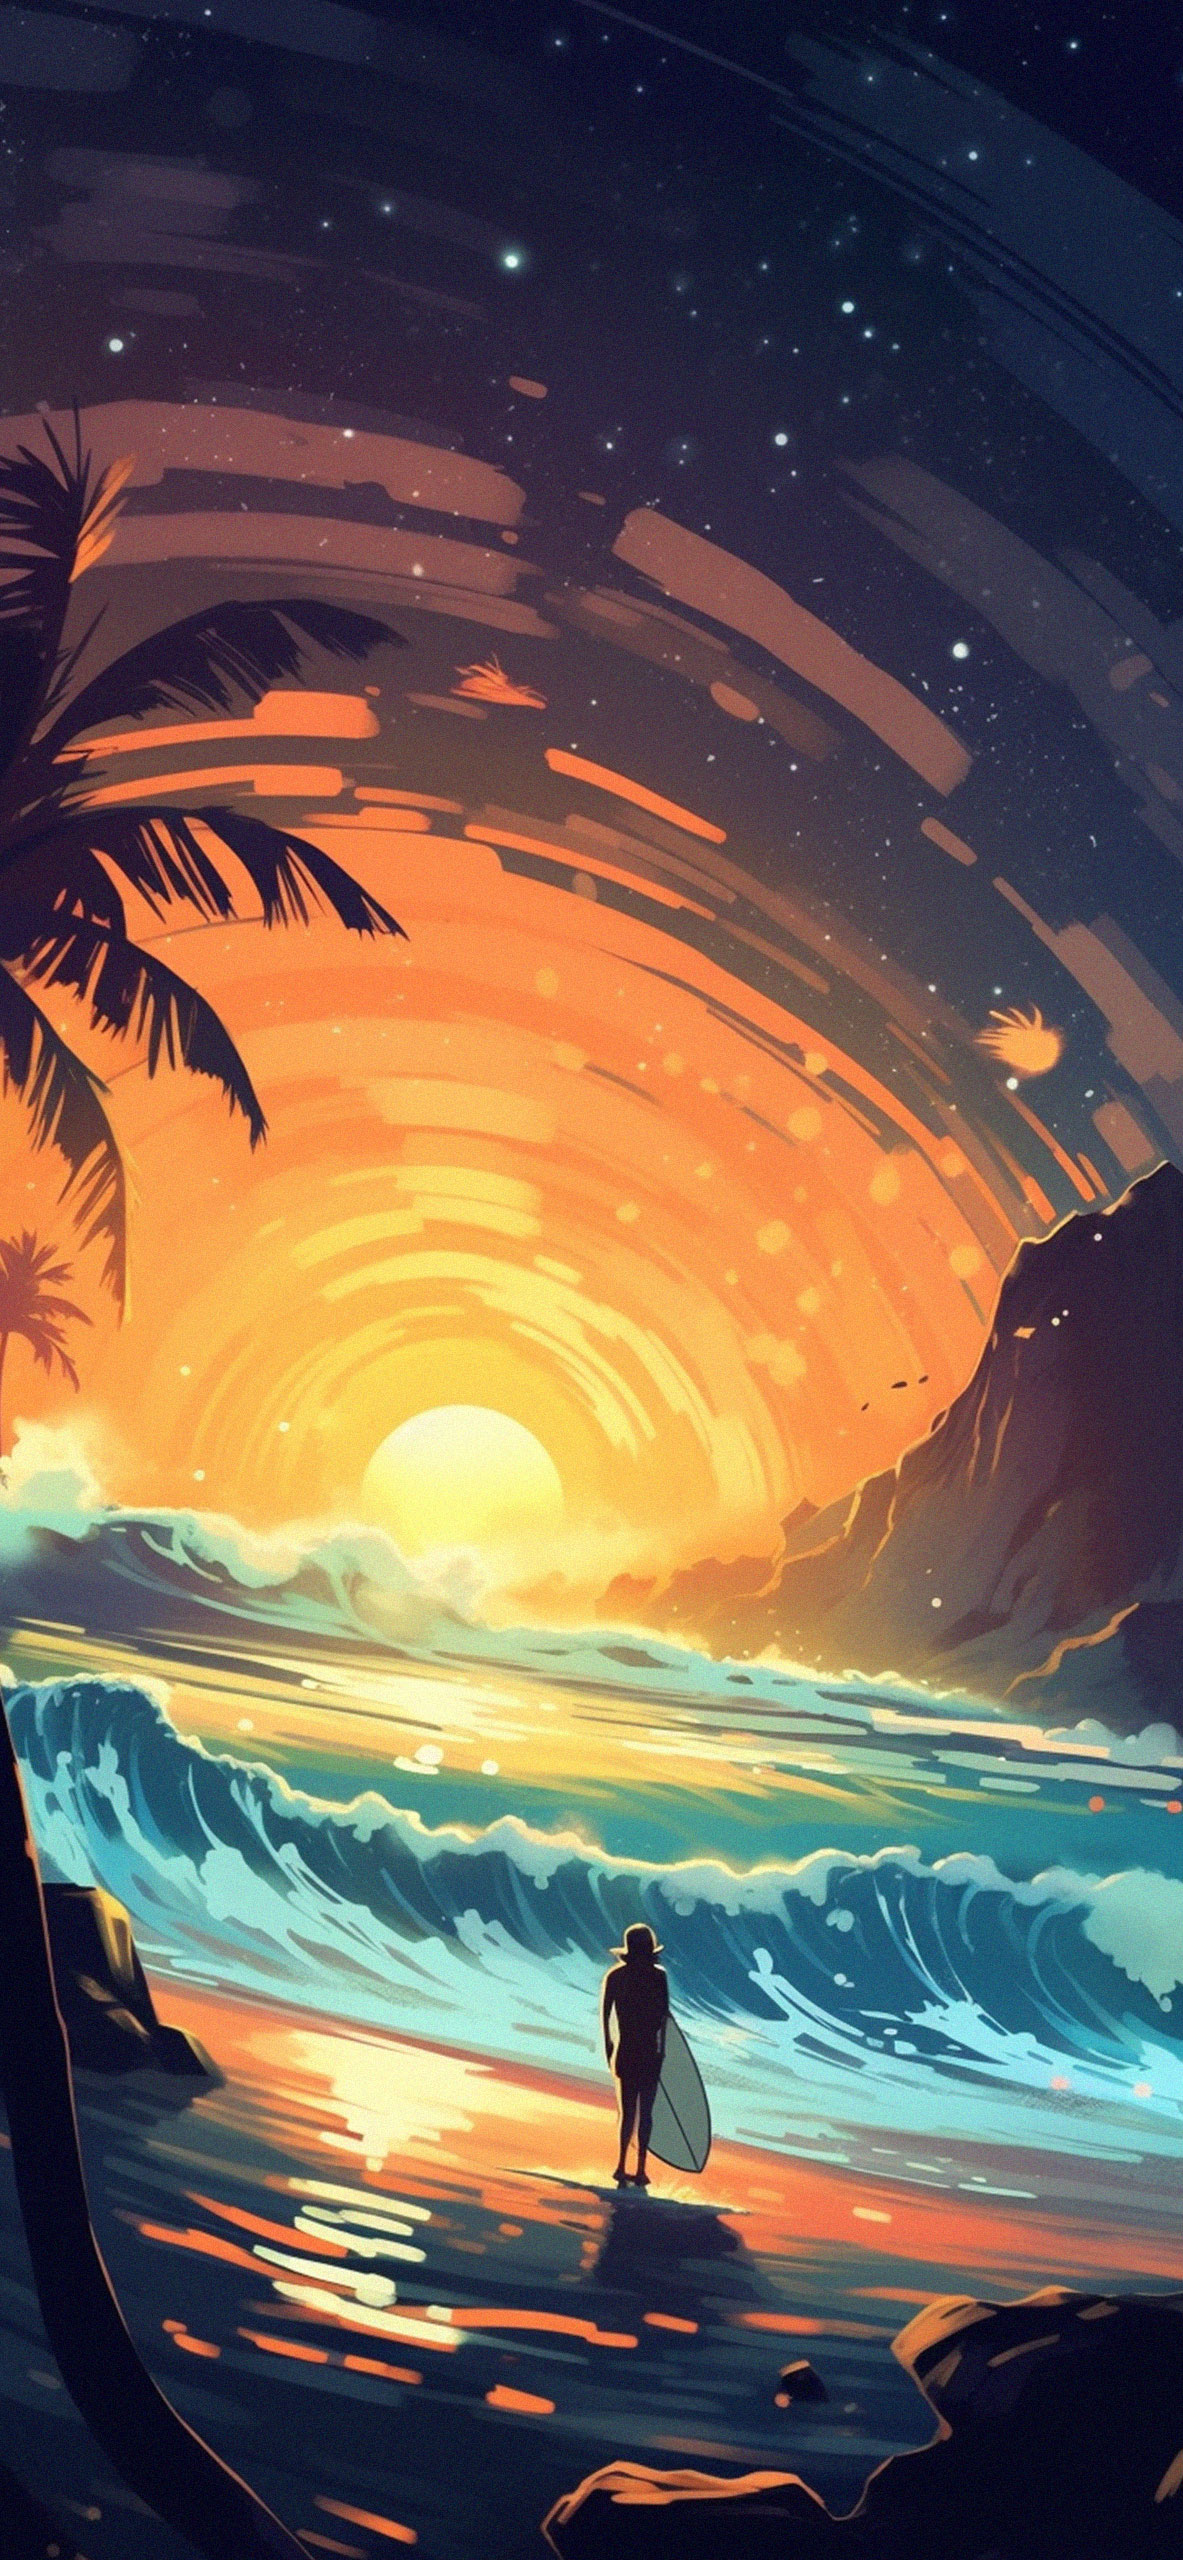 HD wallpaper person surfing on body of water person surfing on waves  during daytime  Wallpaper Flare